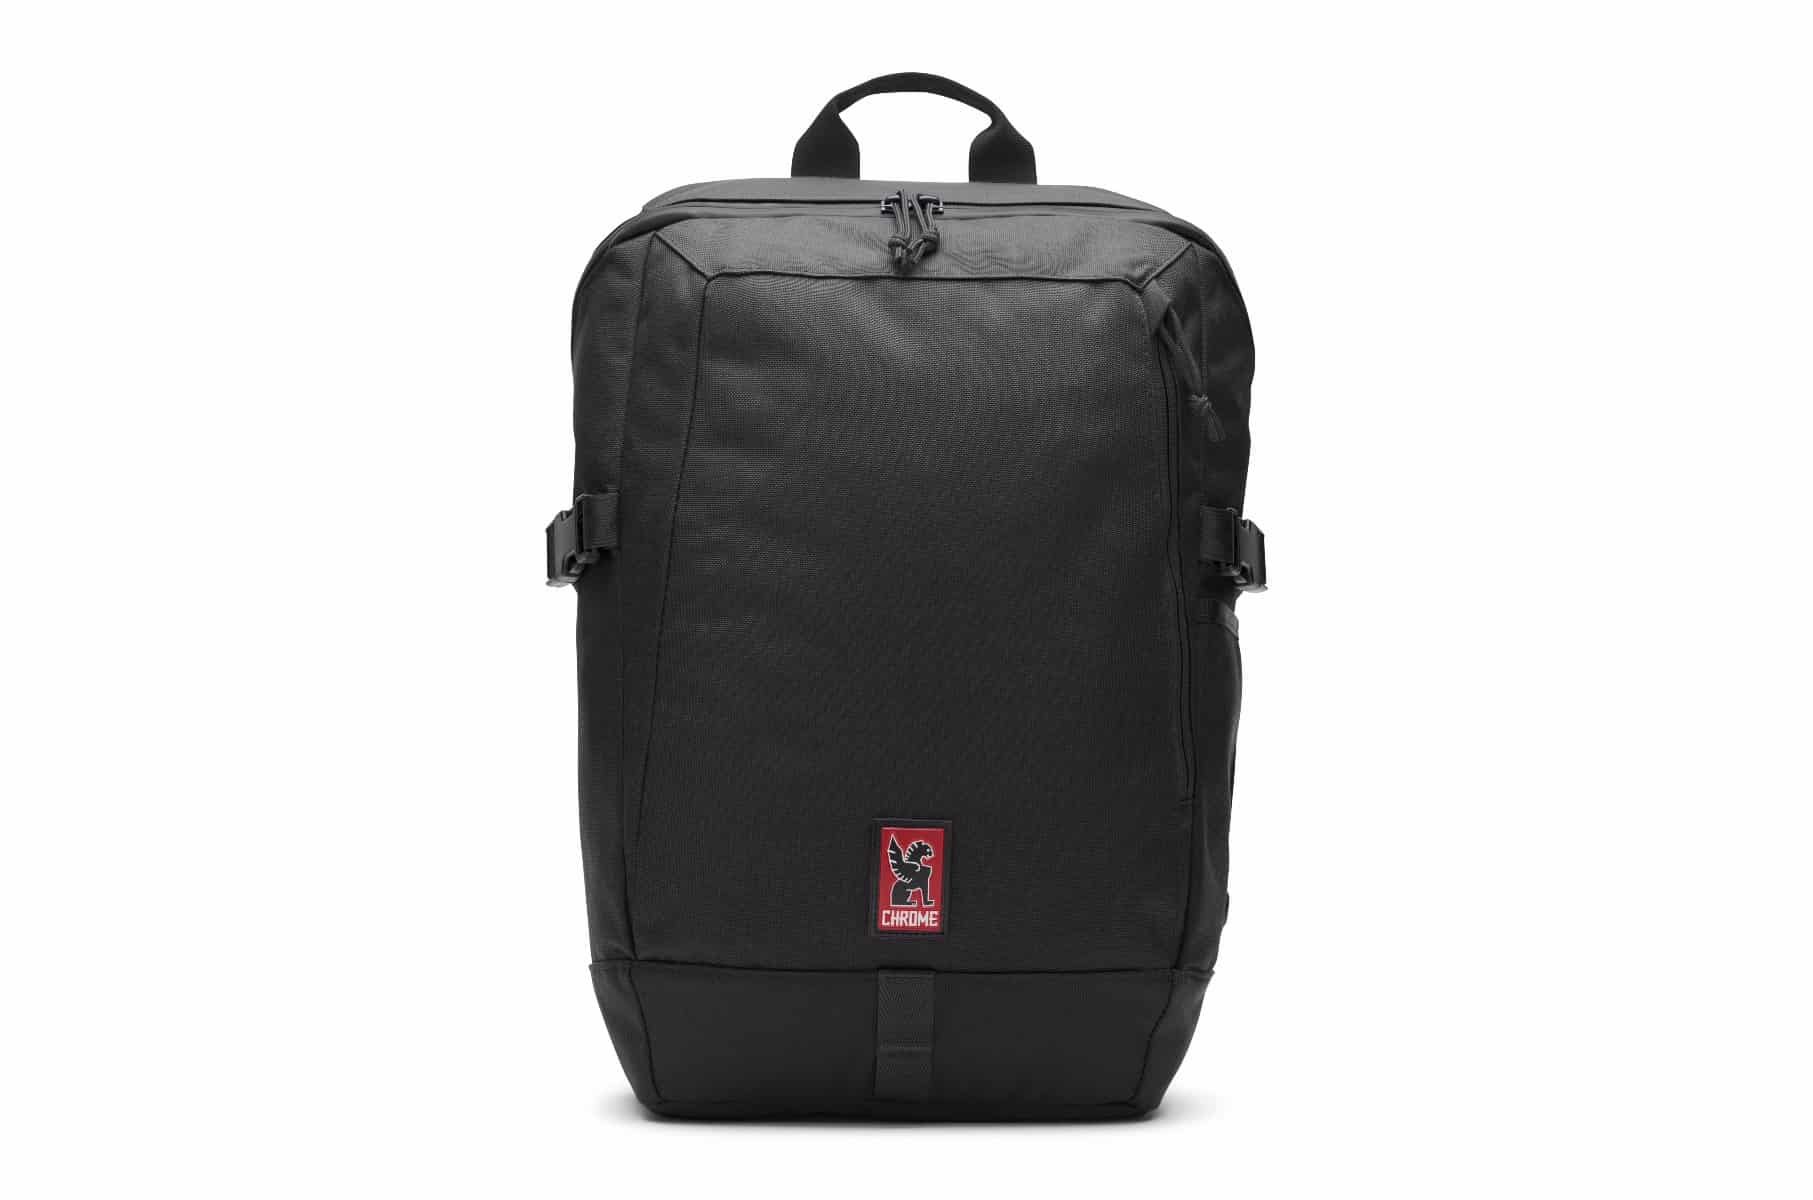 Chrome Industries Rostov Backpack Black - The Fixed Gear Shop